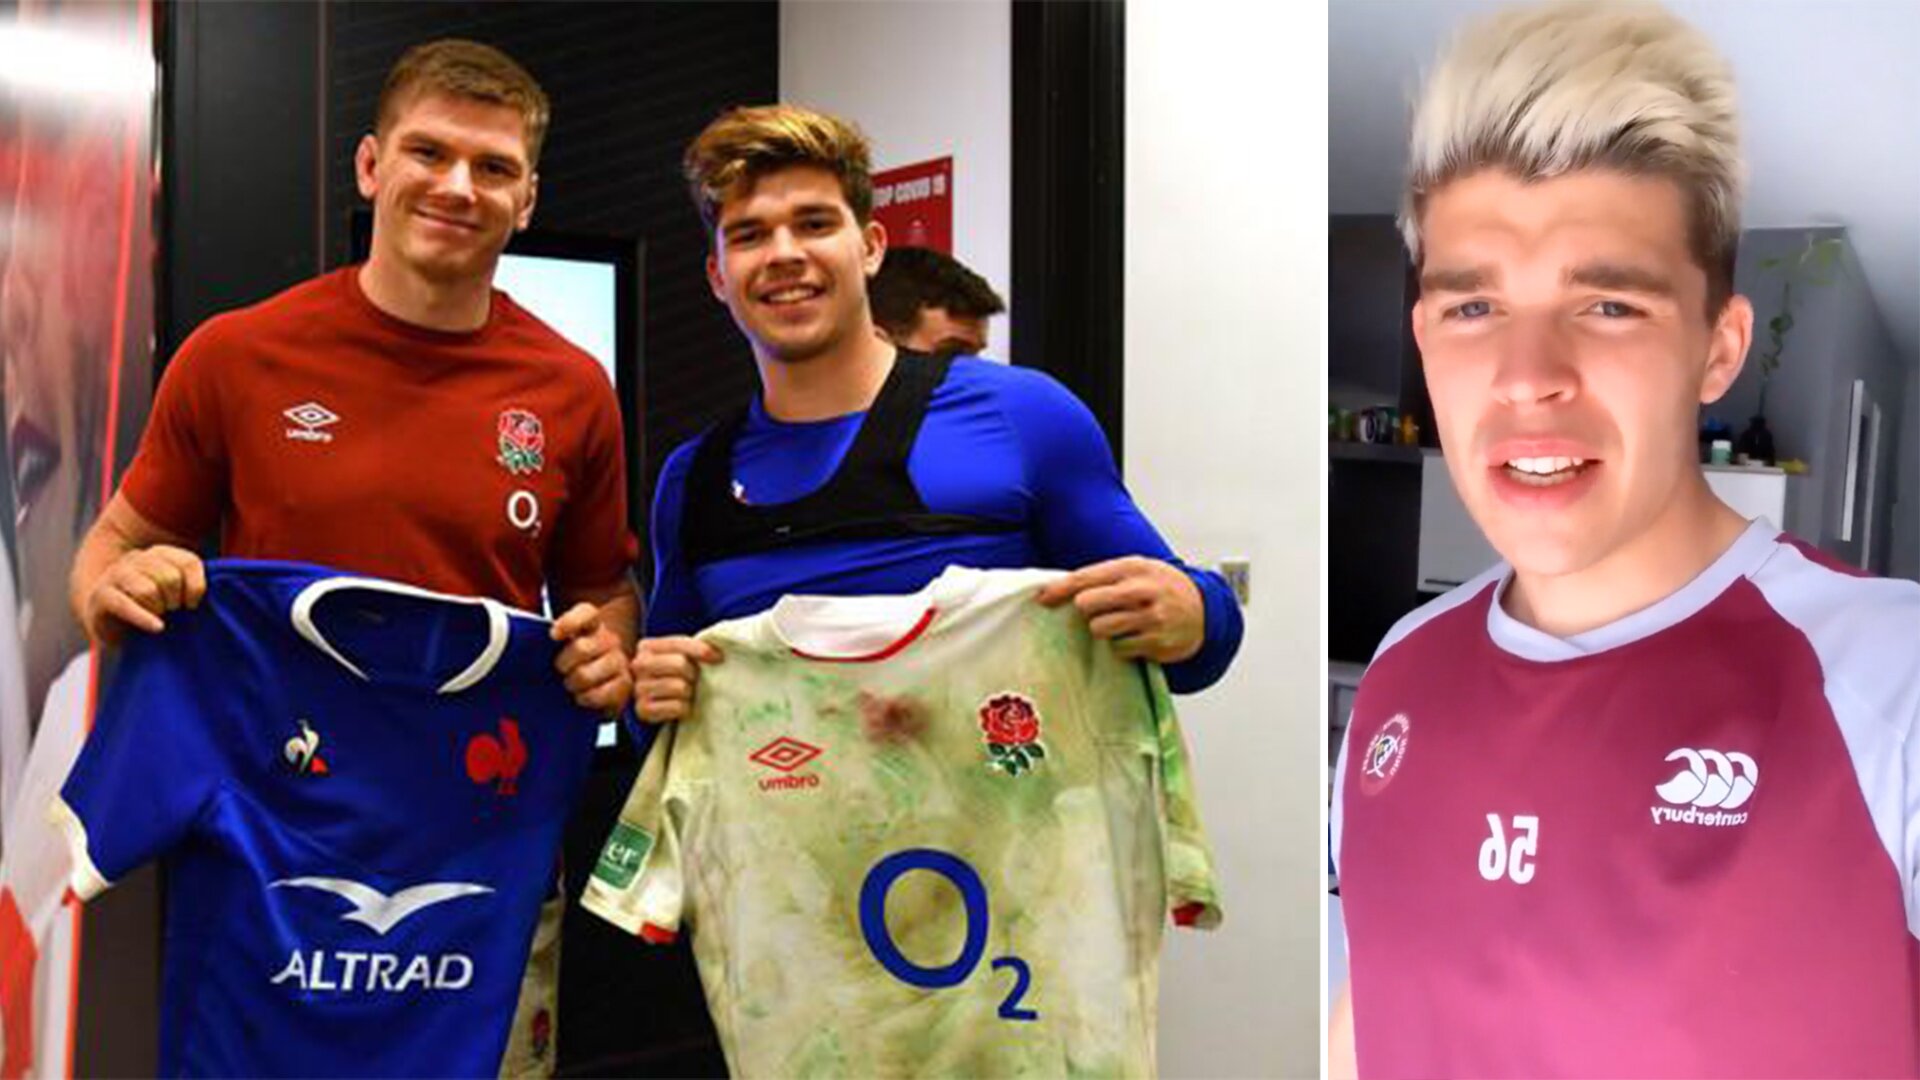 The incredible story behind this photo of Owen Farrell and young French star Matthieu Jalibert